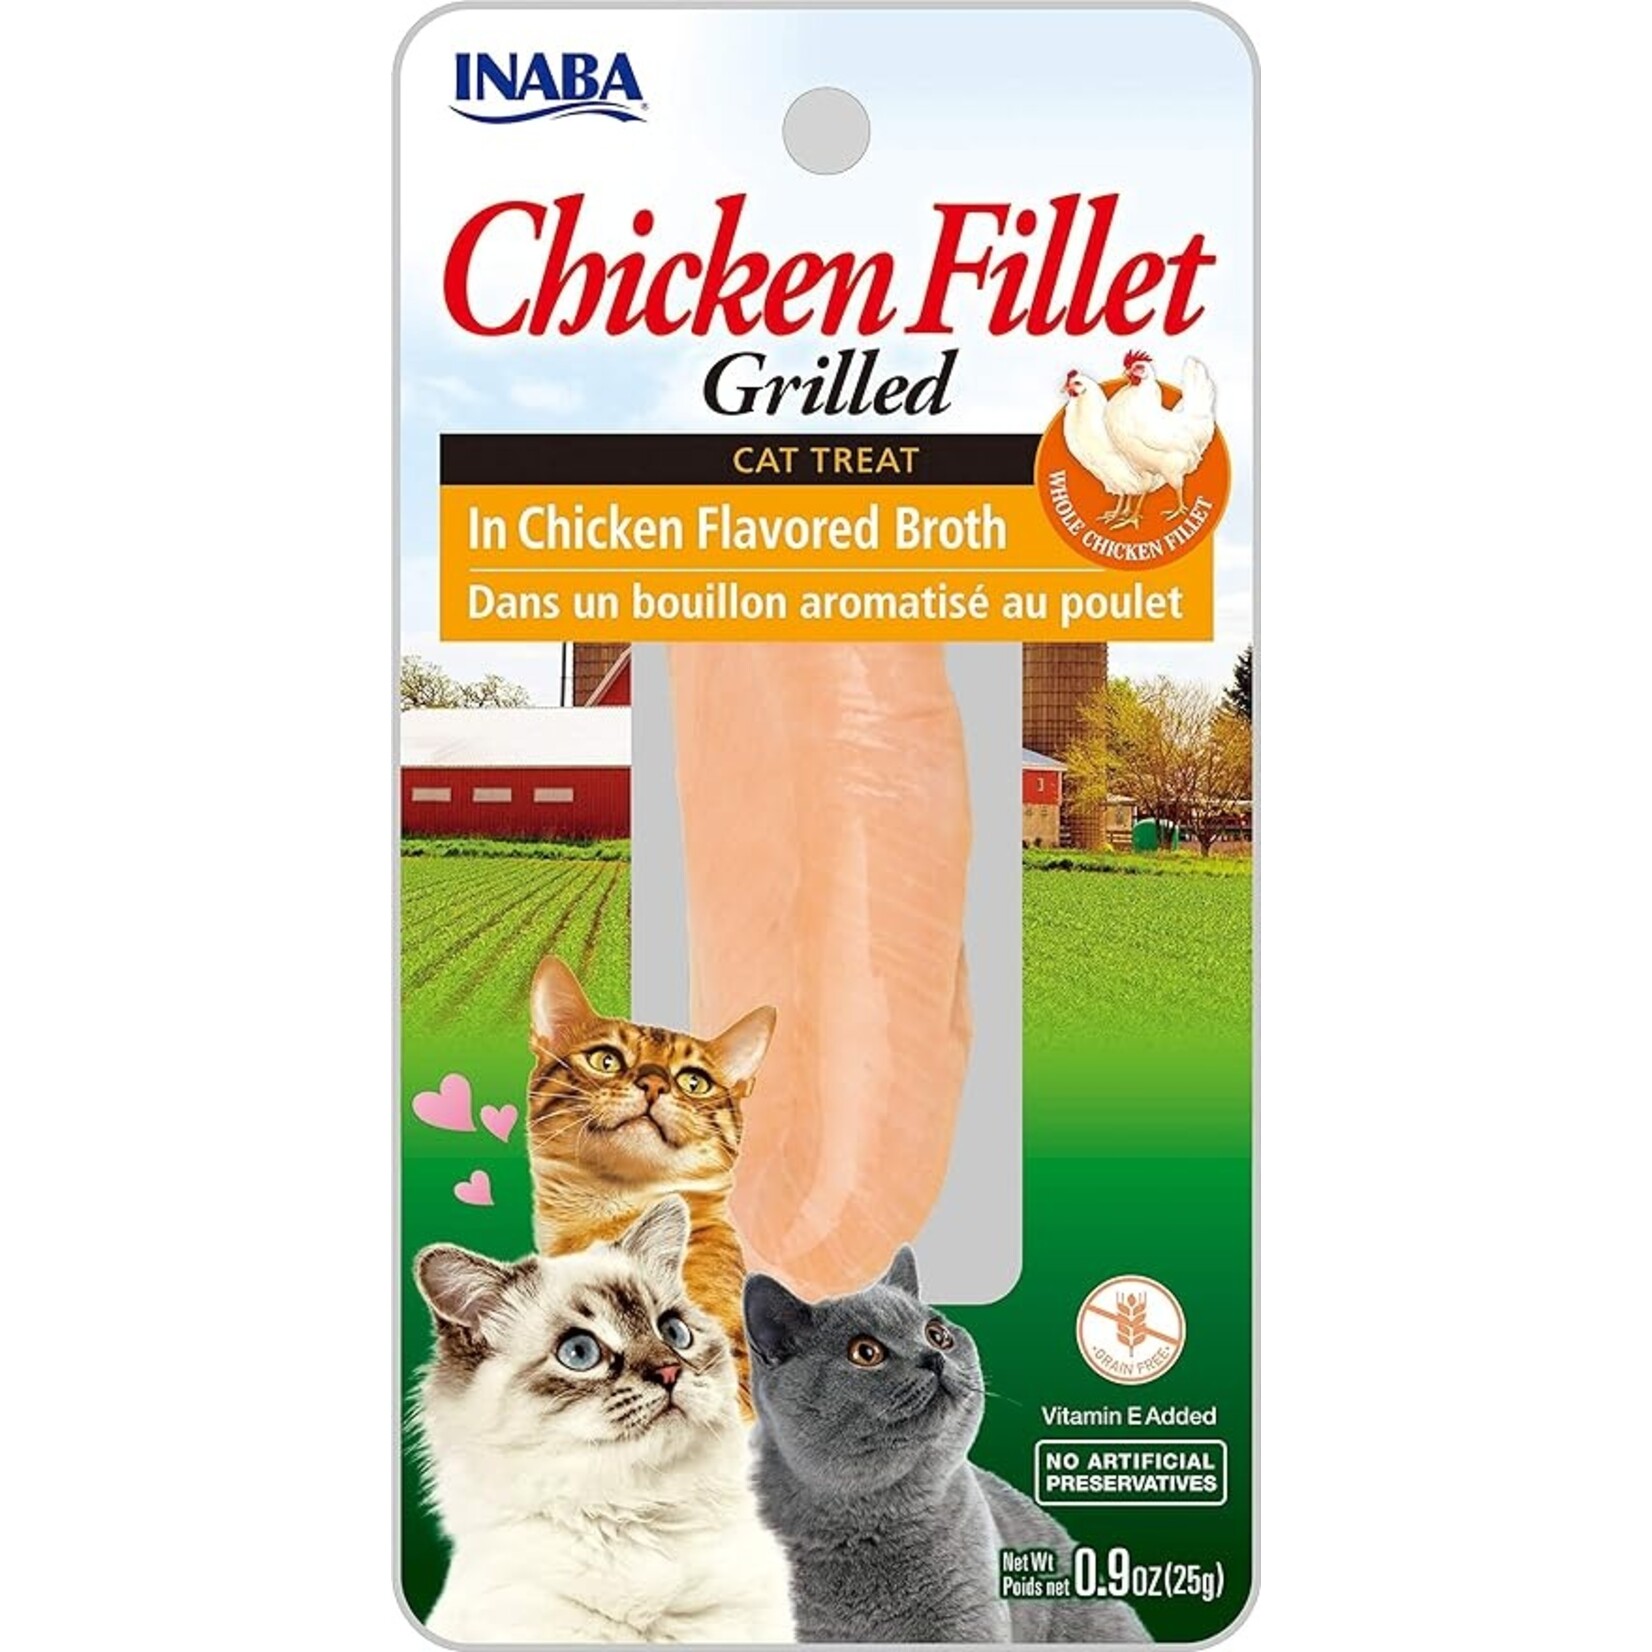 Inaba Grilled Chicken Fillet Cat Treat